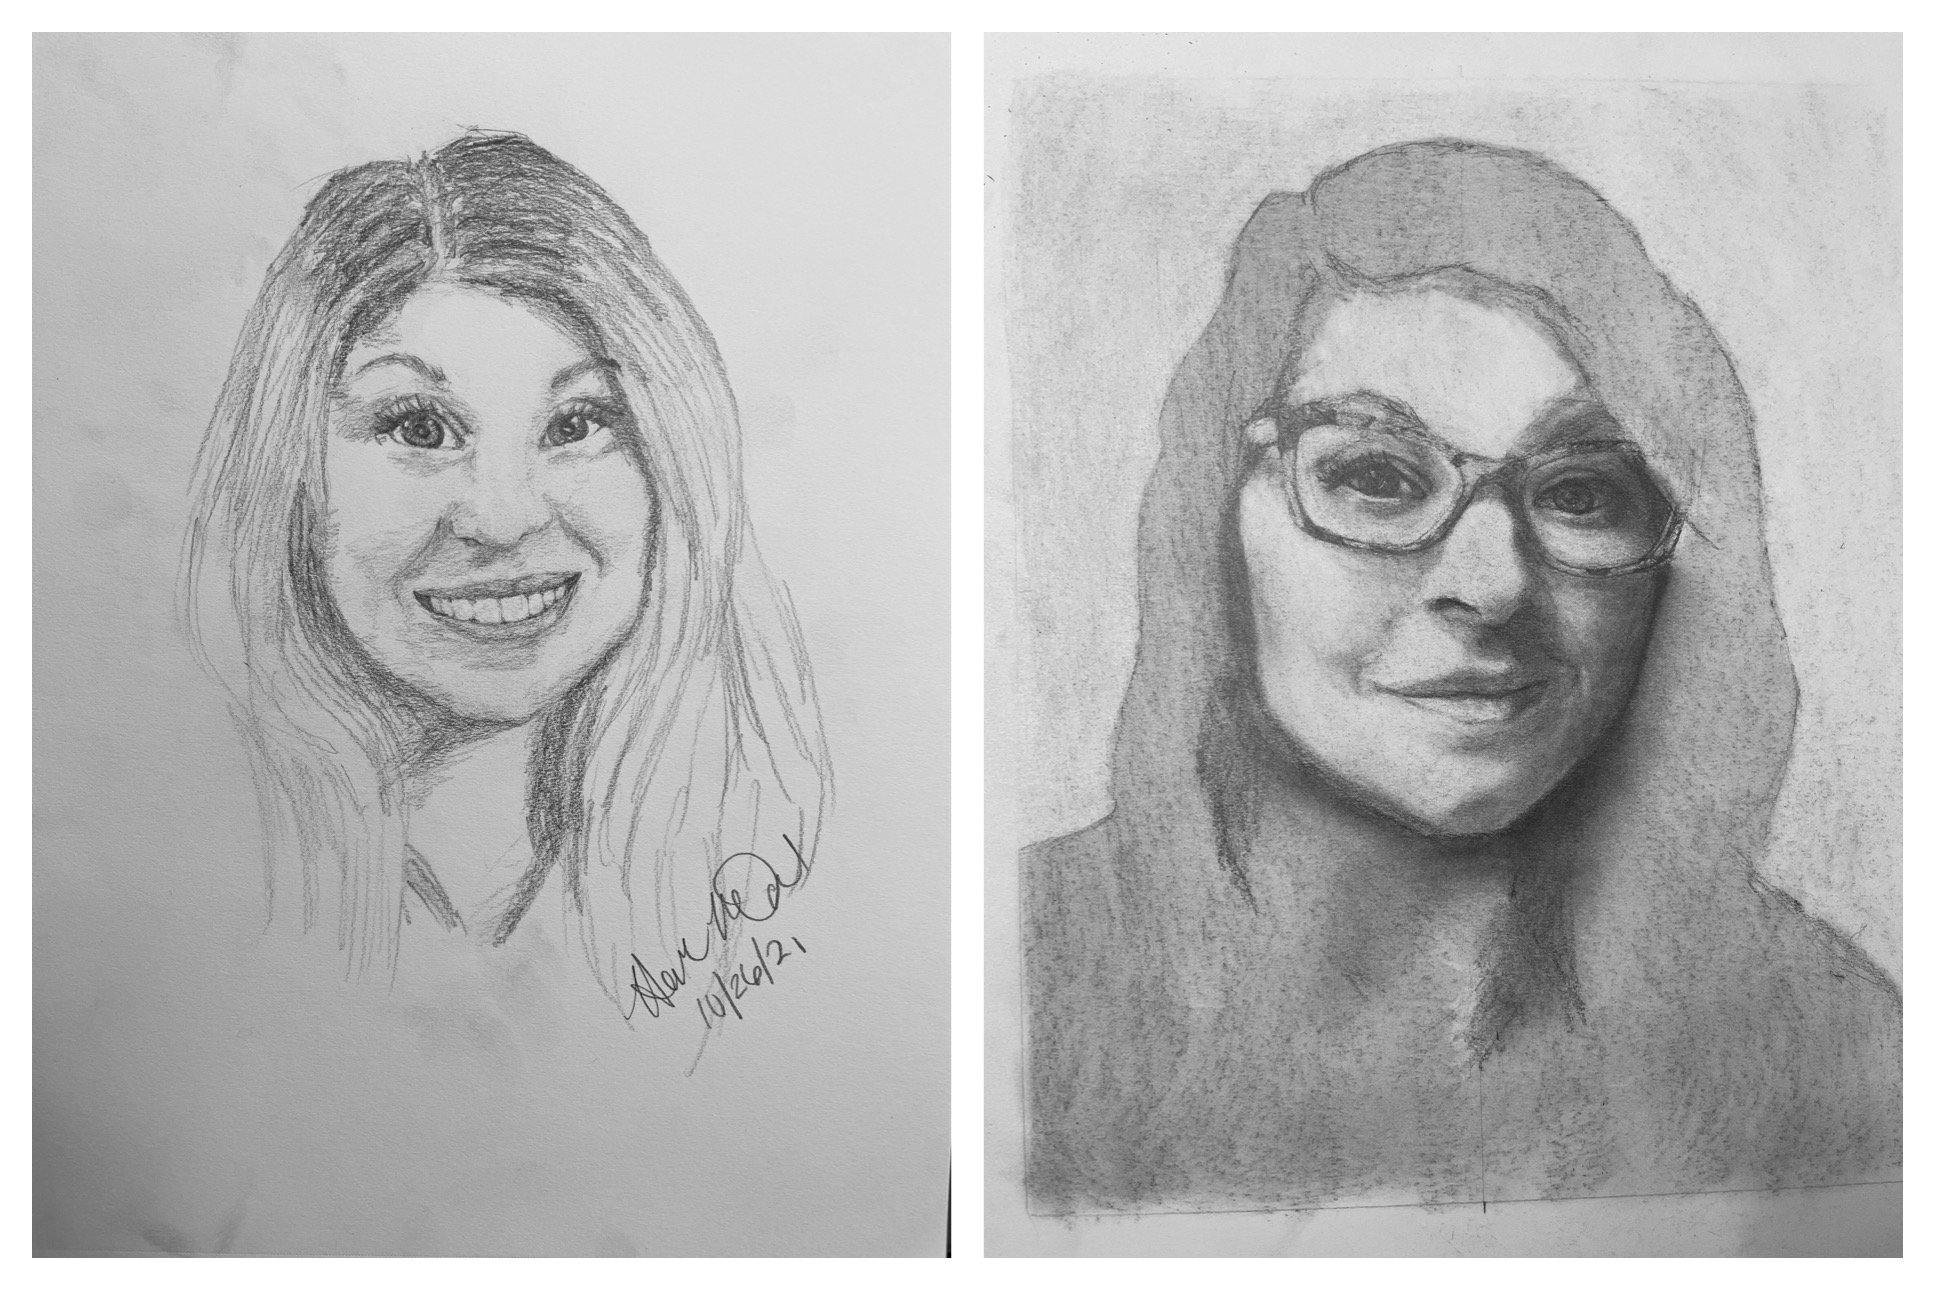 Hannah's Before and After Self-Portraits